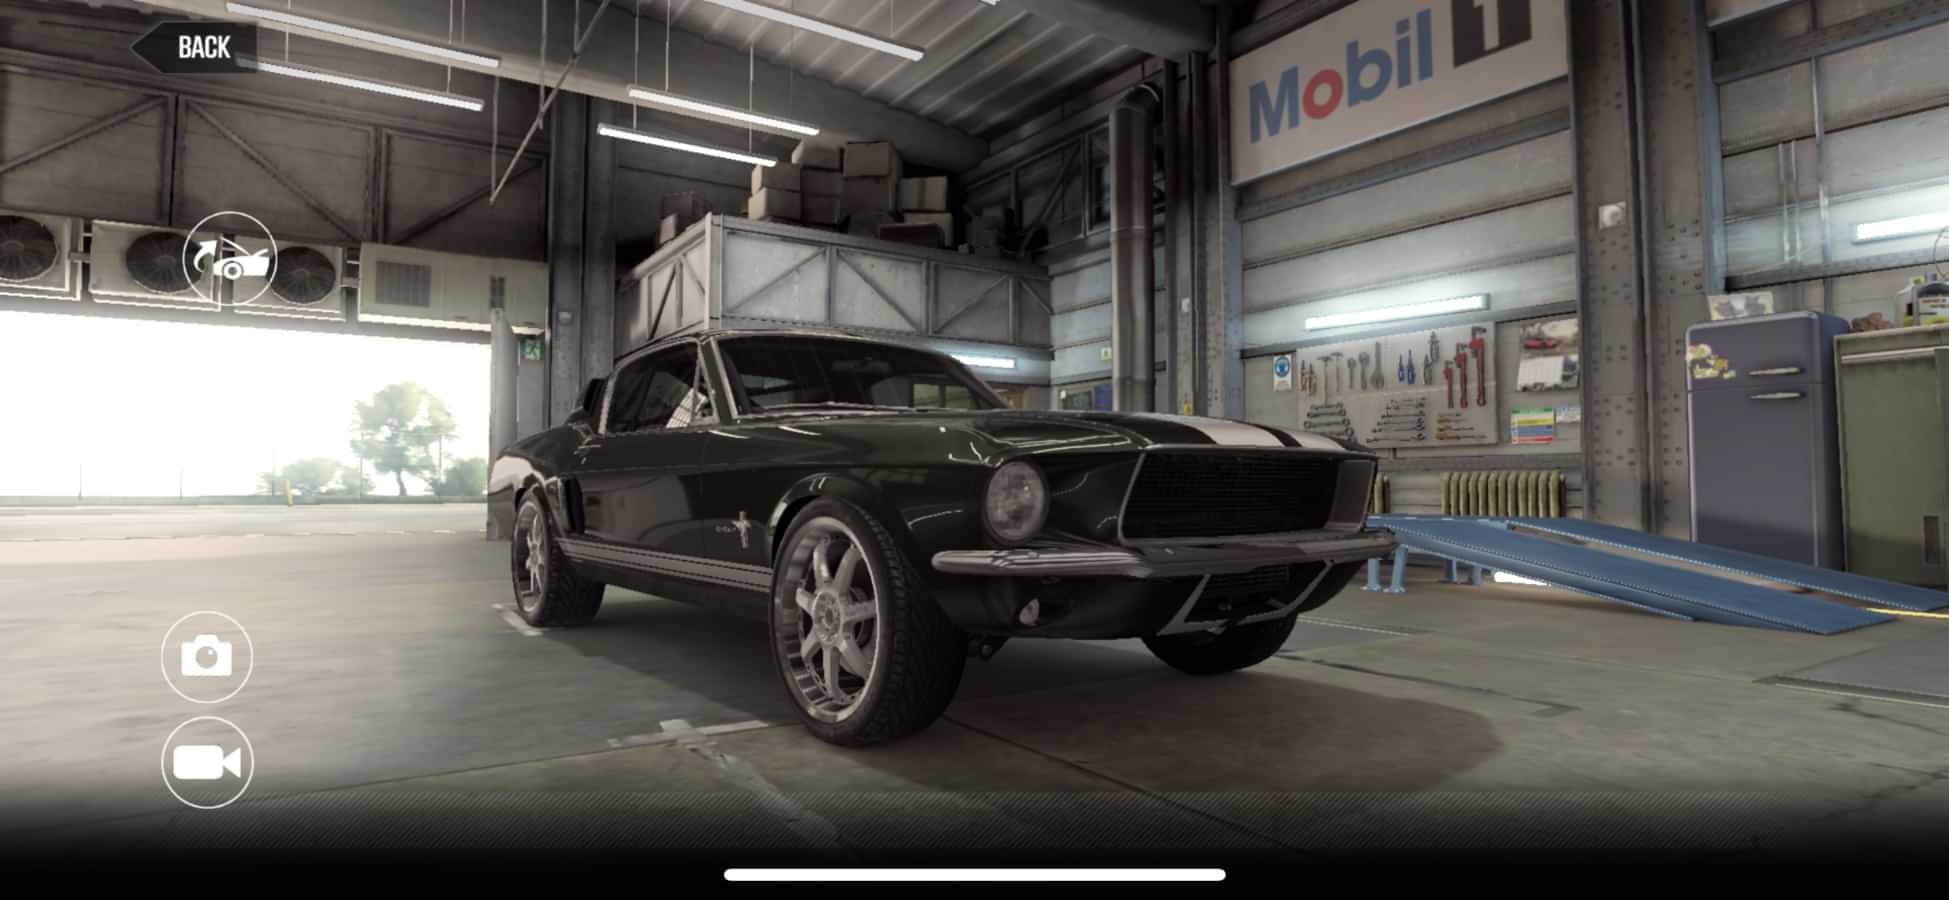 Ford Mustang Fastback CSR2, best tune and shift pattern